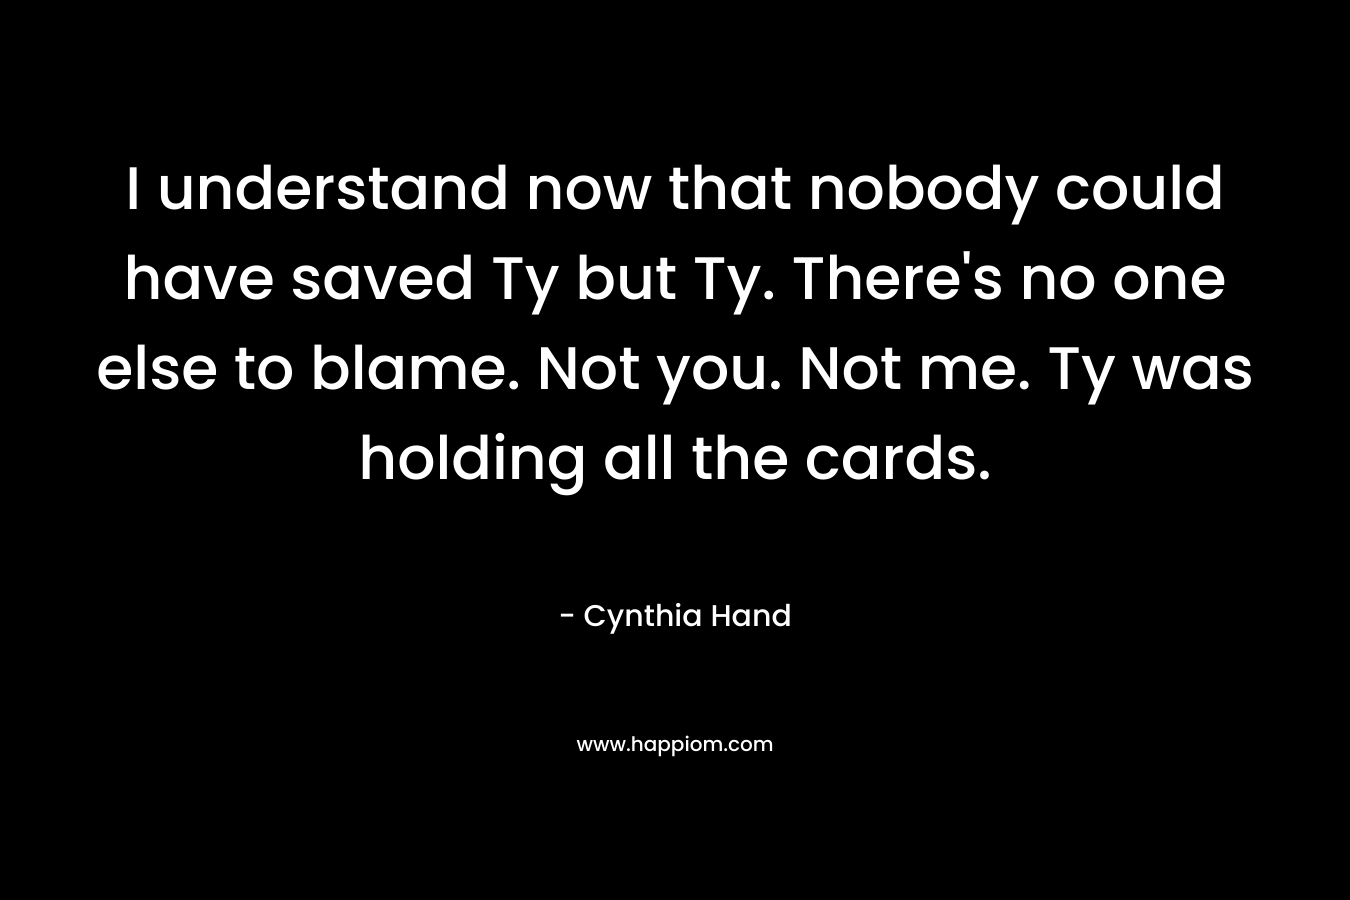 I understand now that nobody could have saved Ty but Ty. There’s no one else to blame. Not you. Not me. Ty was holding all the cards. – Cynthia Hand